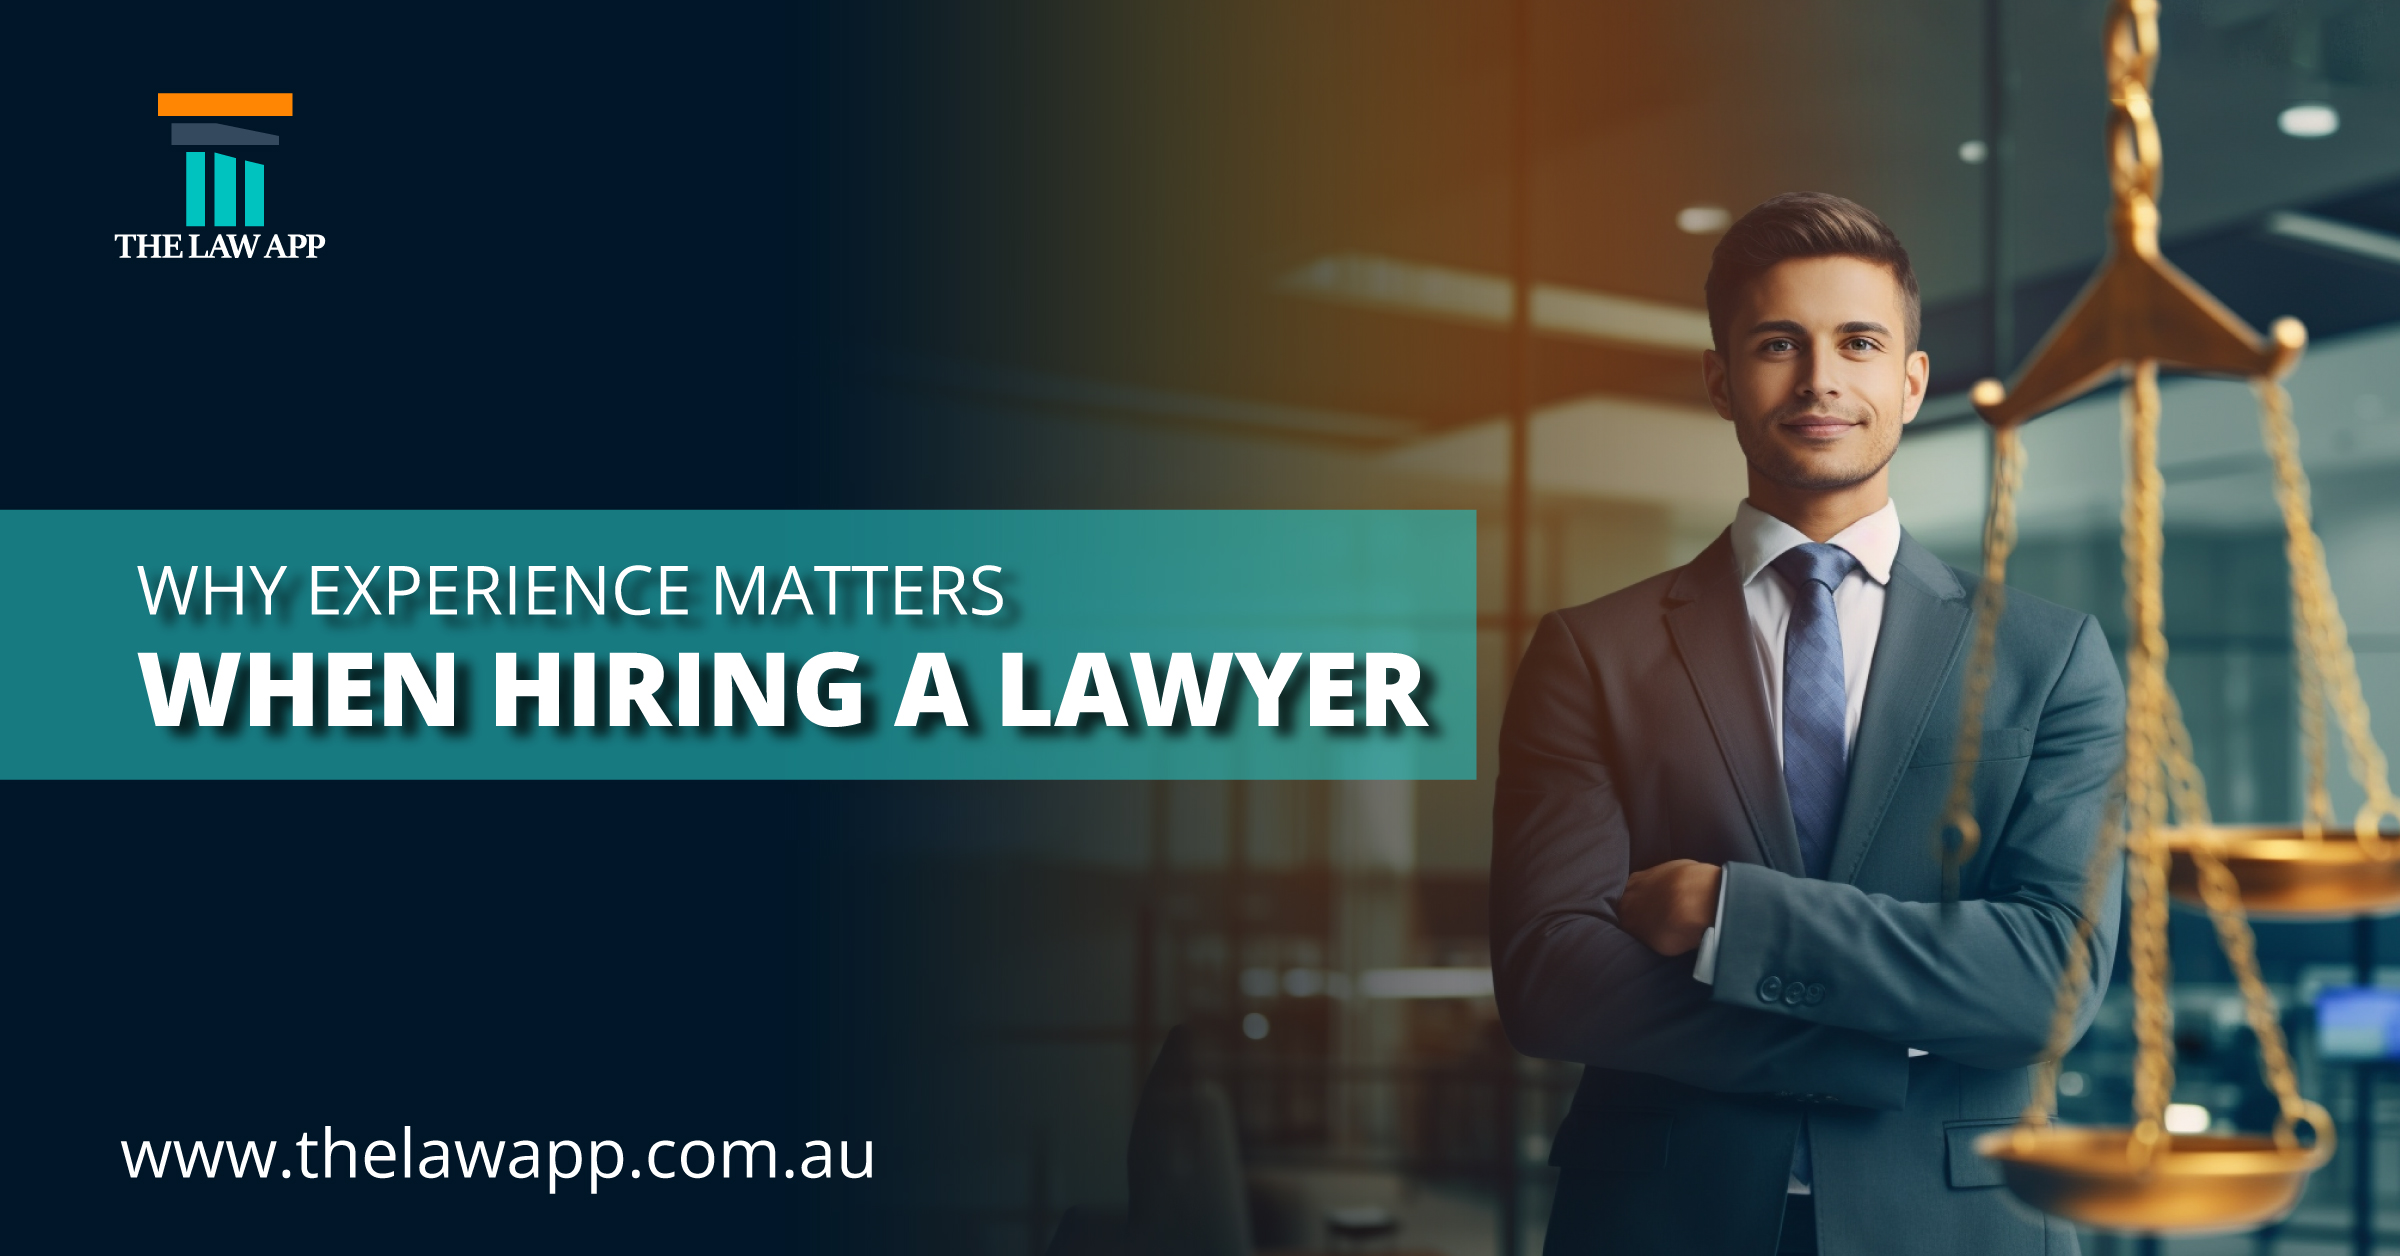 Why Experience Matters When Hiring a Lawyer